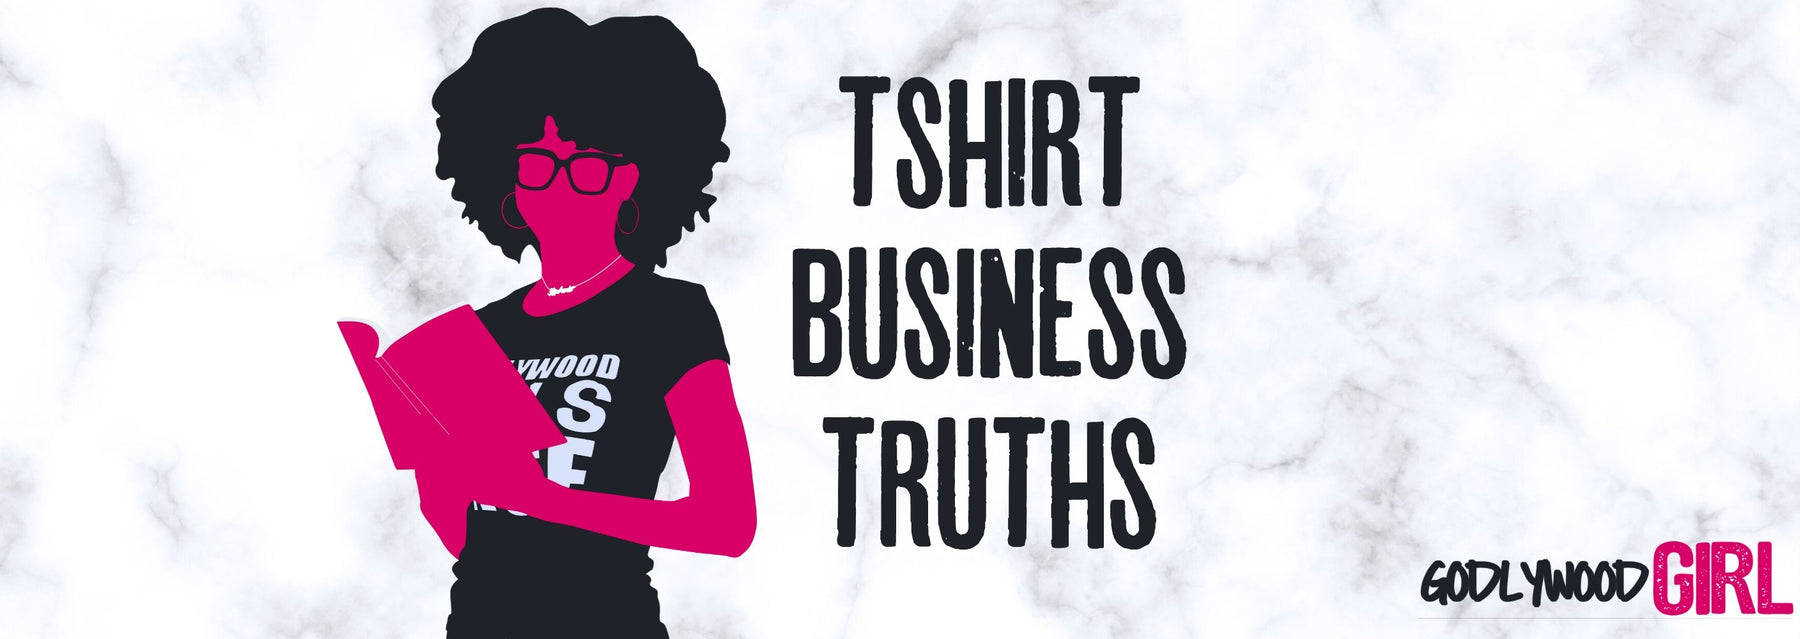 The Truth About Starting A Christian T-Shirt Business That No One Tells You... (Entrepreneur Series)